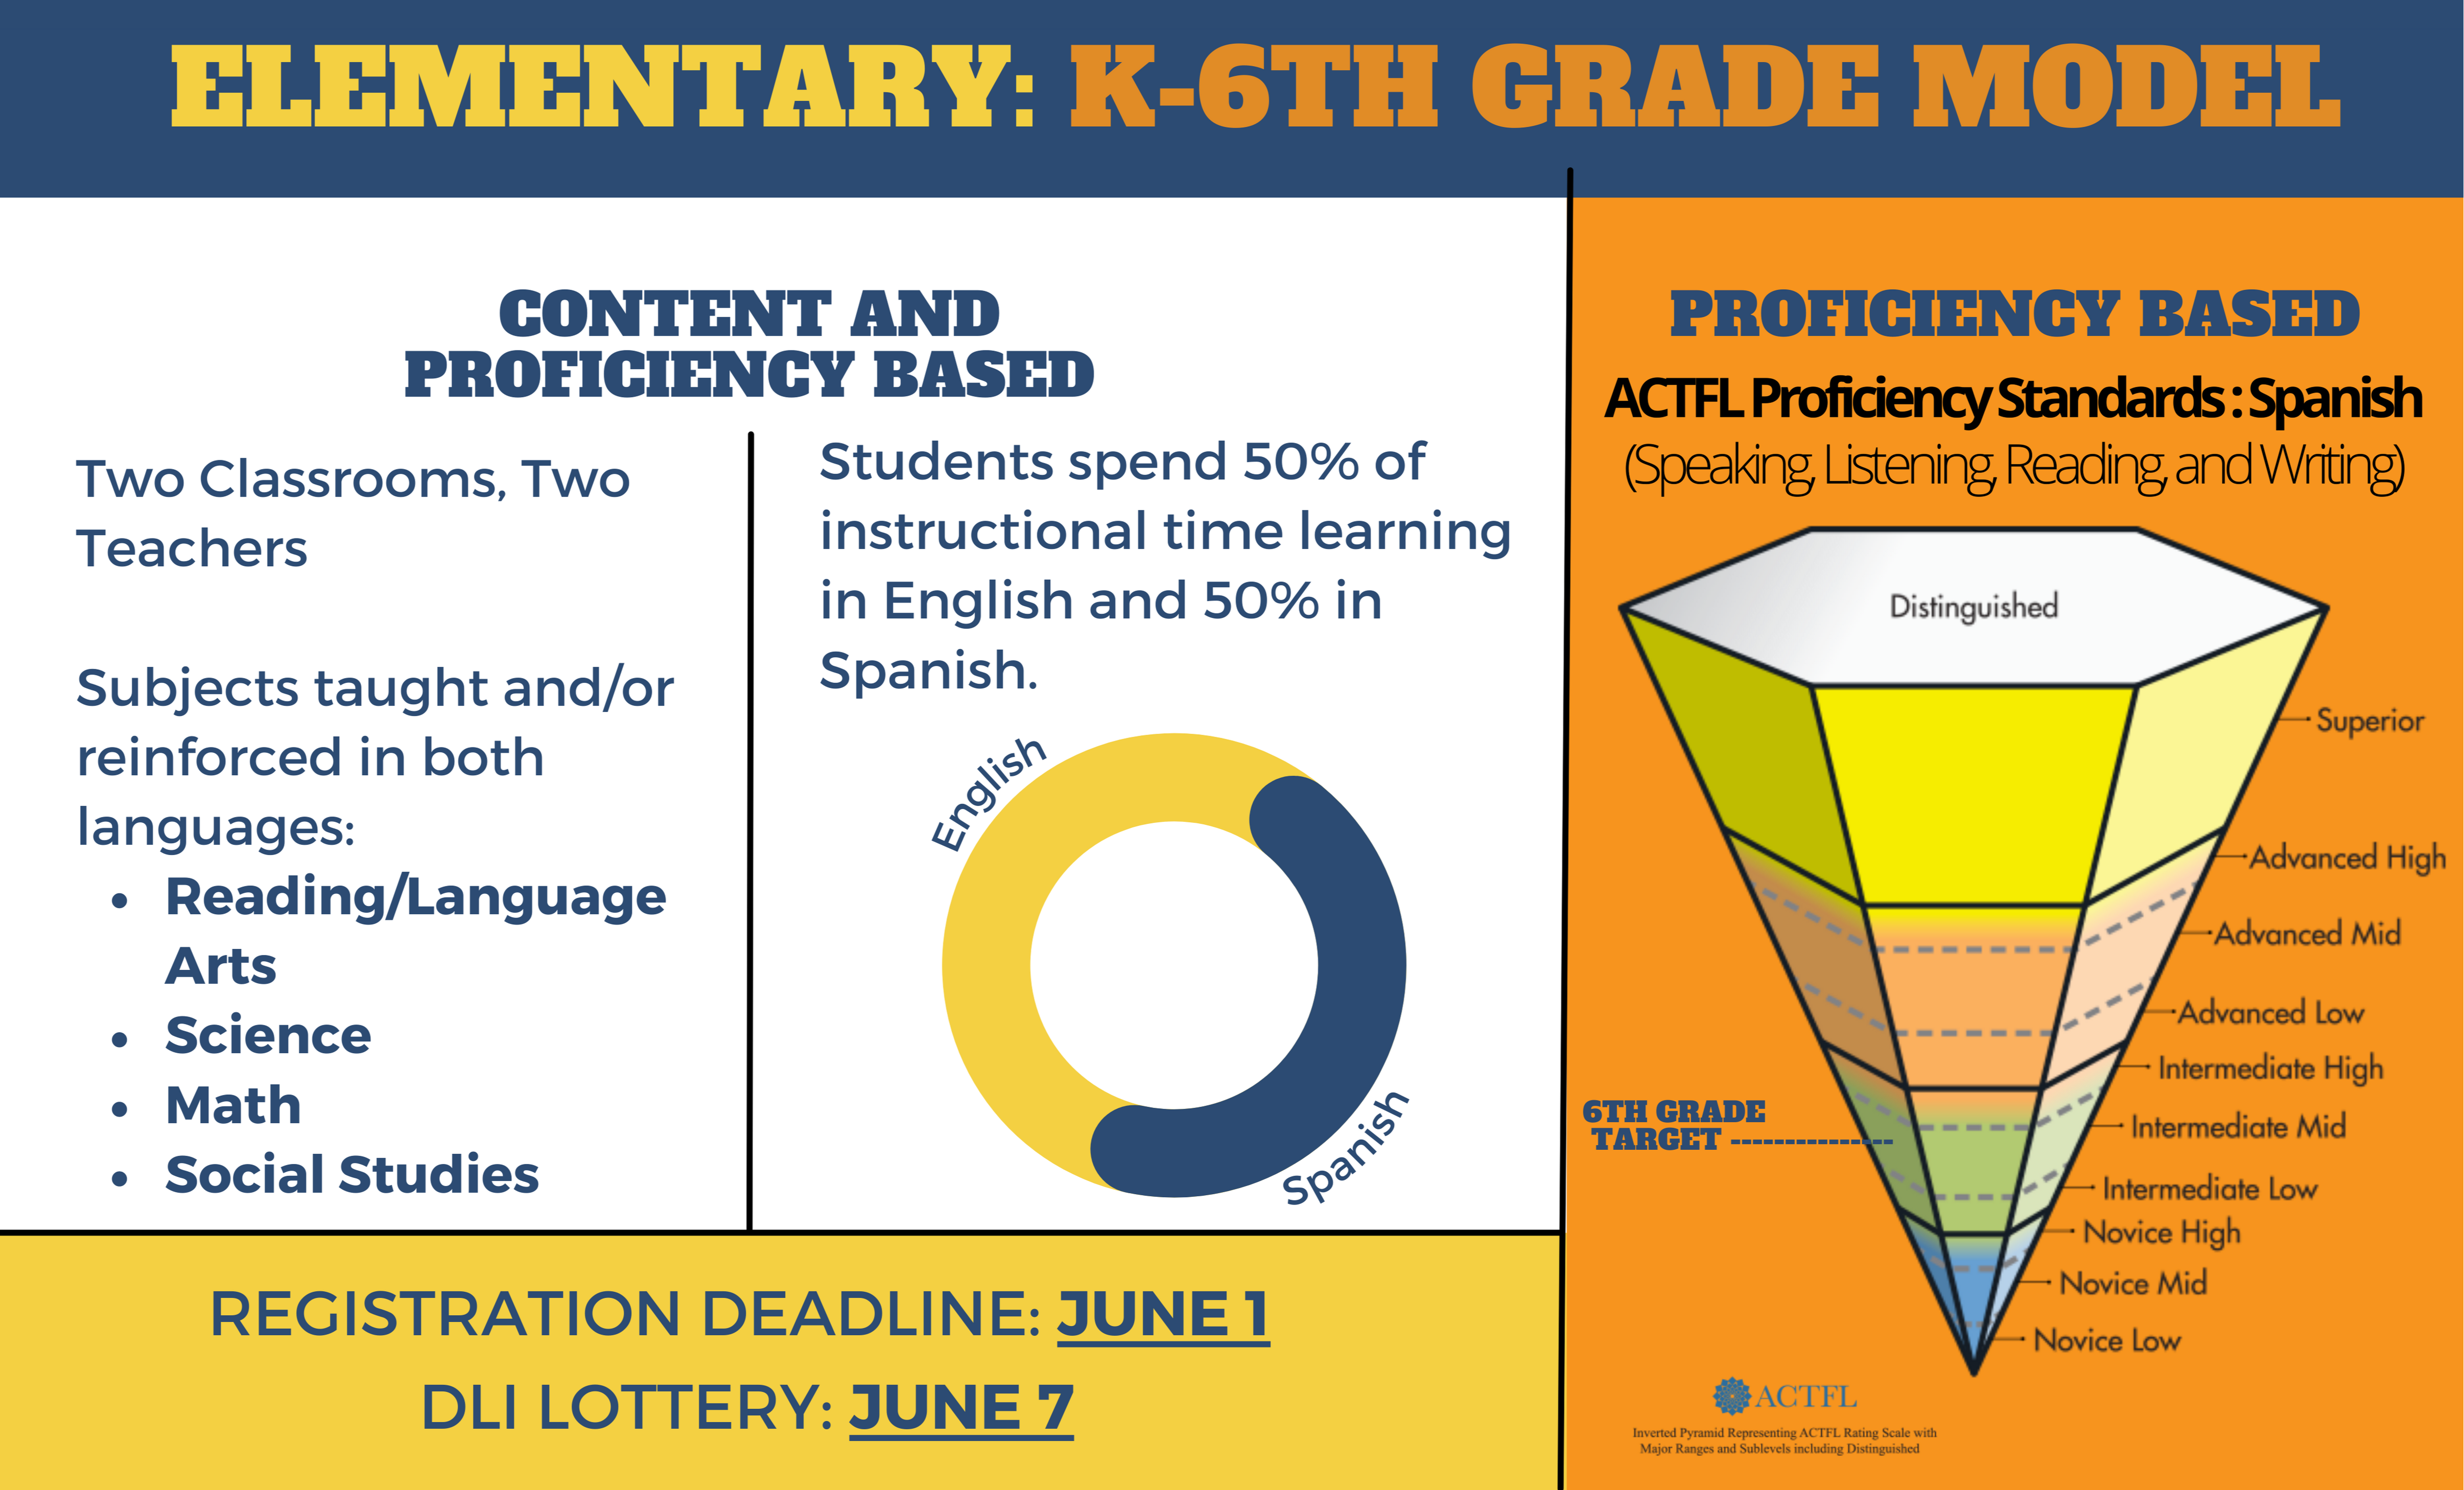 Elementary: K-6th Grade Model. Content and proficiency based Two classrooms, two teachers. Subjects taught and/or reinforced in both languages: reading/language arts, science, math, social studies. Students spend 50% of instructional time learning in english and 50% in spanish. Registsration deadline: June 1 DLI Lottery: June 7. Proficiency based ACTFL Proficiency Standards: Spanish (Speaking, Listening, Reading, and Writing) Distinguished, superior, advanced high, advanced mid, advanced low, intermediate high, intermediate mid (6th grade target(, intermediate low, novice high, novice mid, novice low